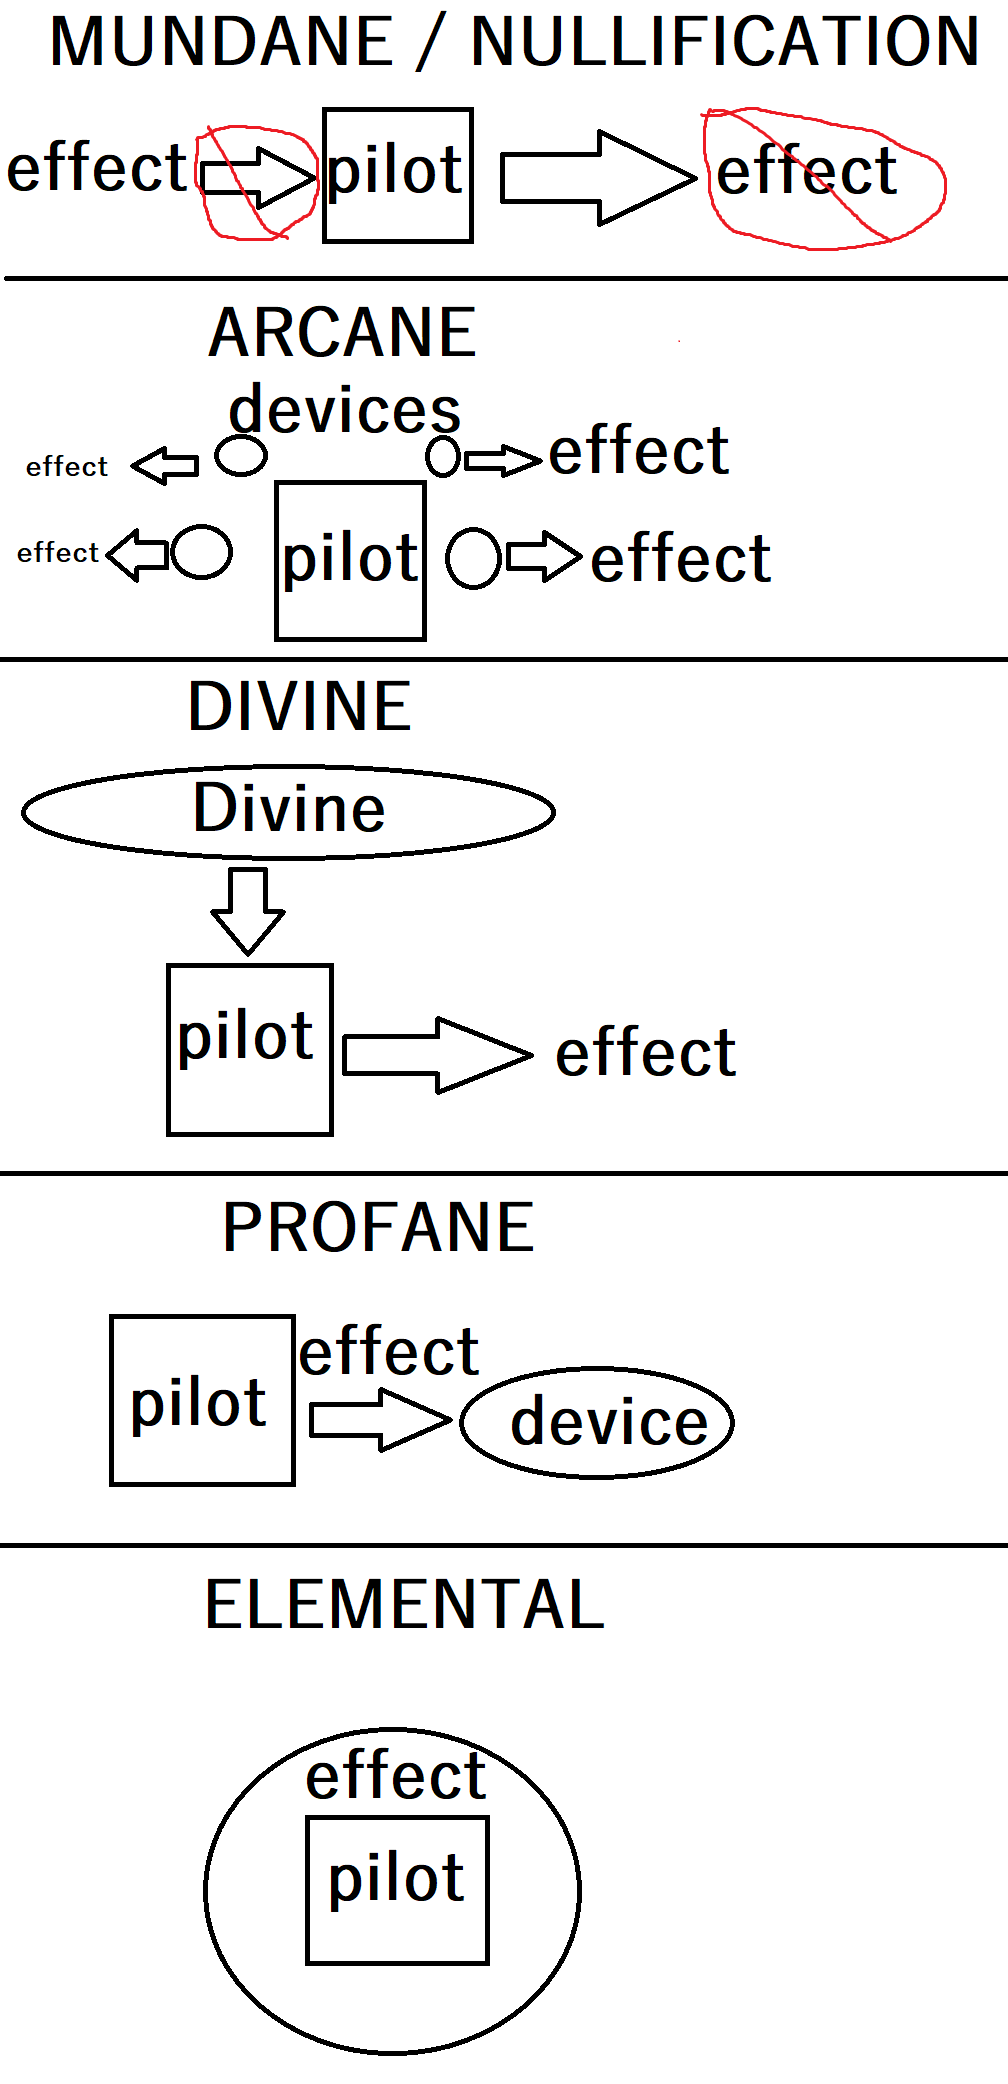 A simple diagram of the relationship between pilot and effect in each of the above approaches.